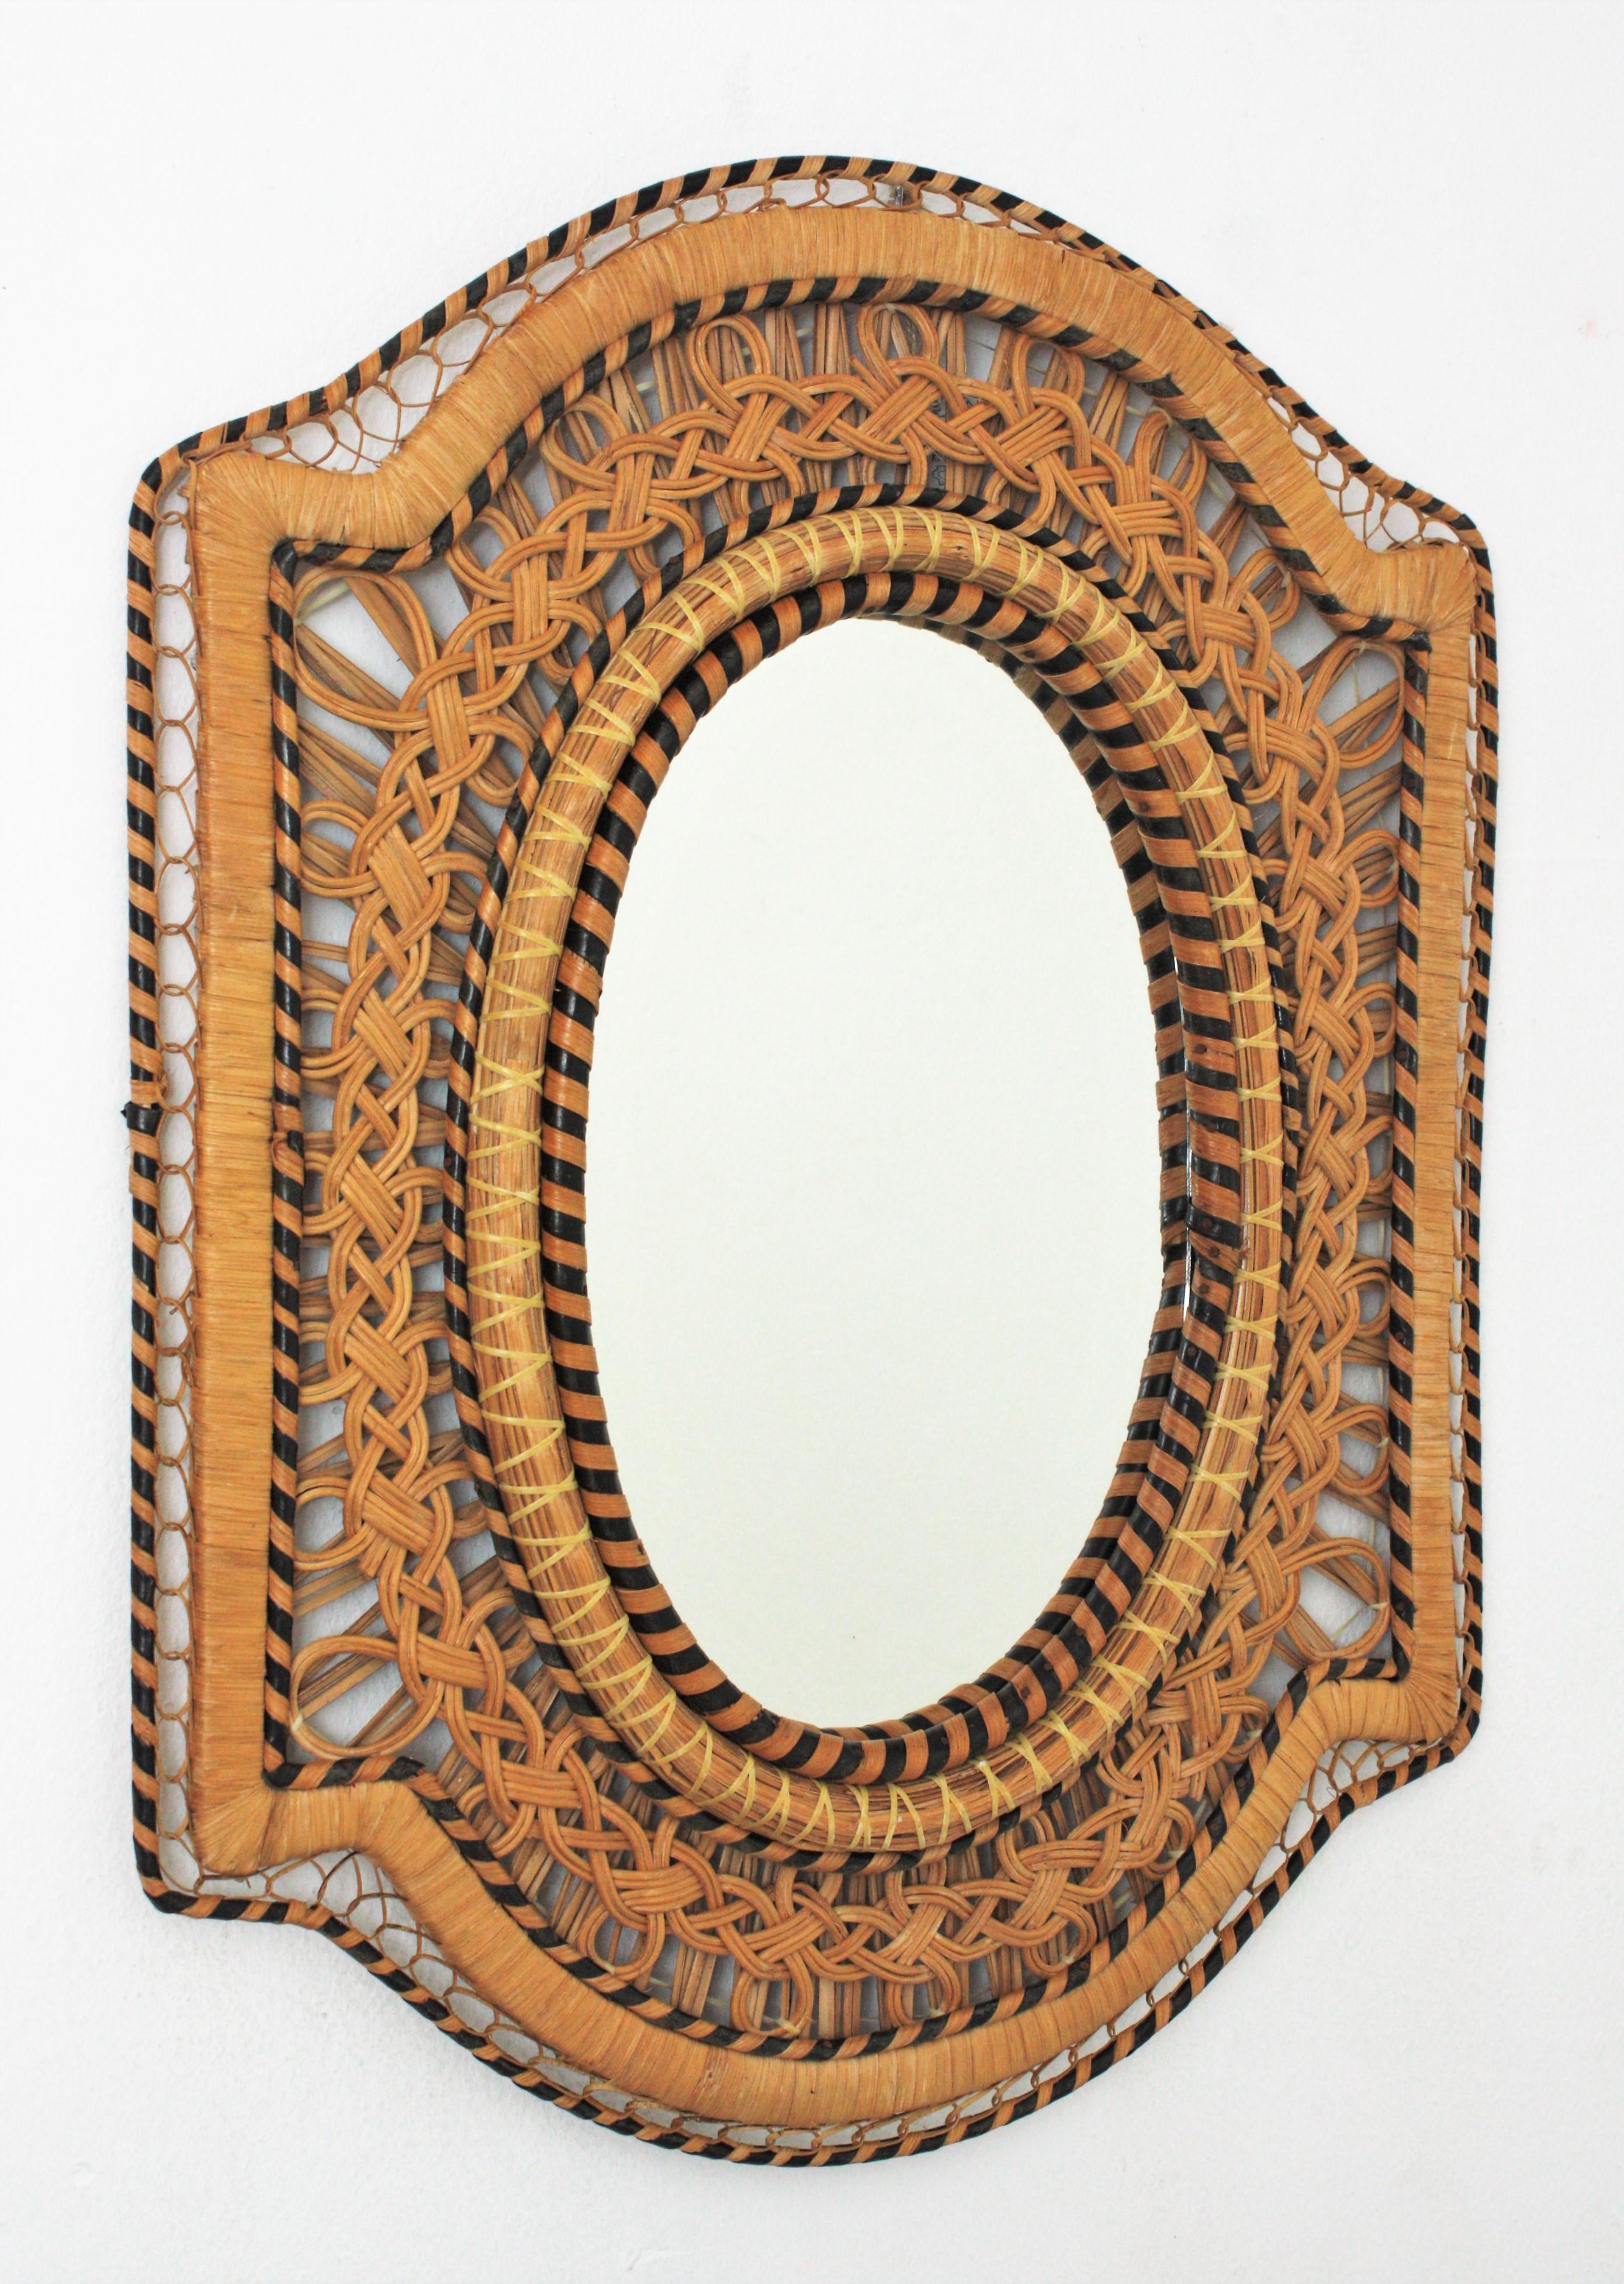 Peacock woven wicker rattan midcentury mirror, Spain 1970s
This eye-catching mirror is framed by a handwoven wicker intrincate and natural fibers combining different colors and creating a beautiful visual effect.
It show an excellent handcrafted